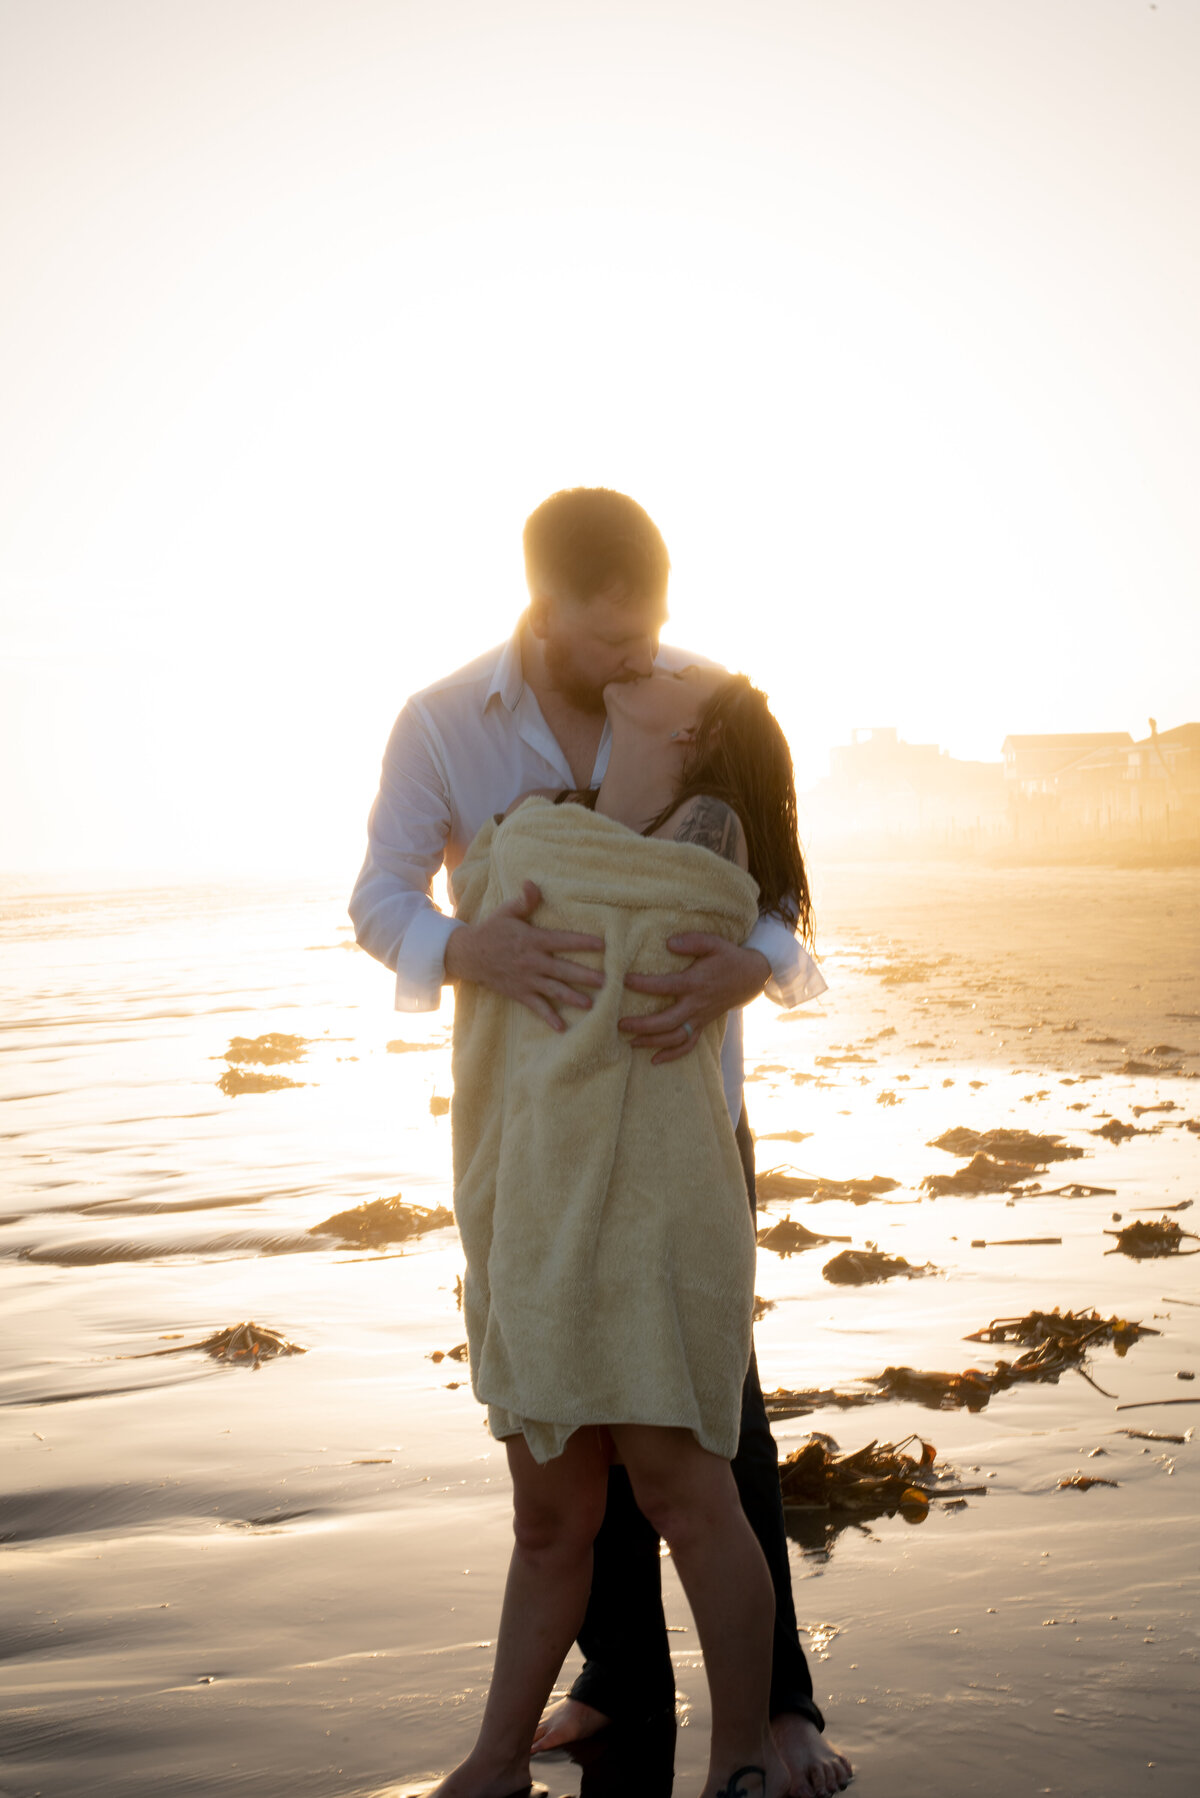 Embrace the warmth of a couple on the beach during a dreamy sunset, wrapped in a cozy blanket. Our photo captures the intimate connection as the sun sets on their day